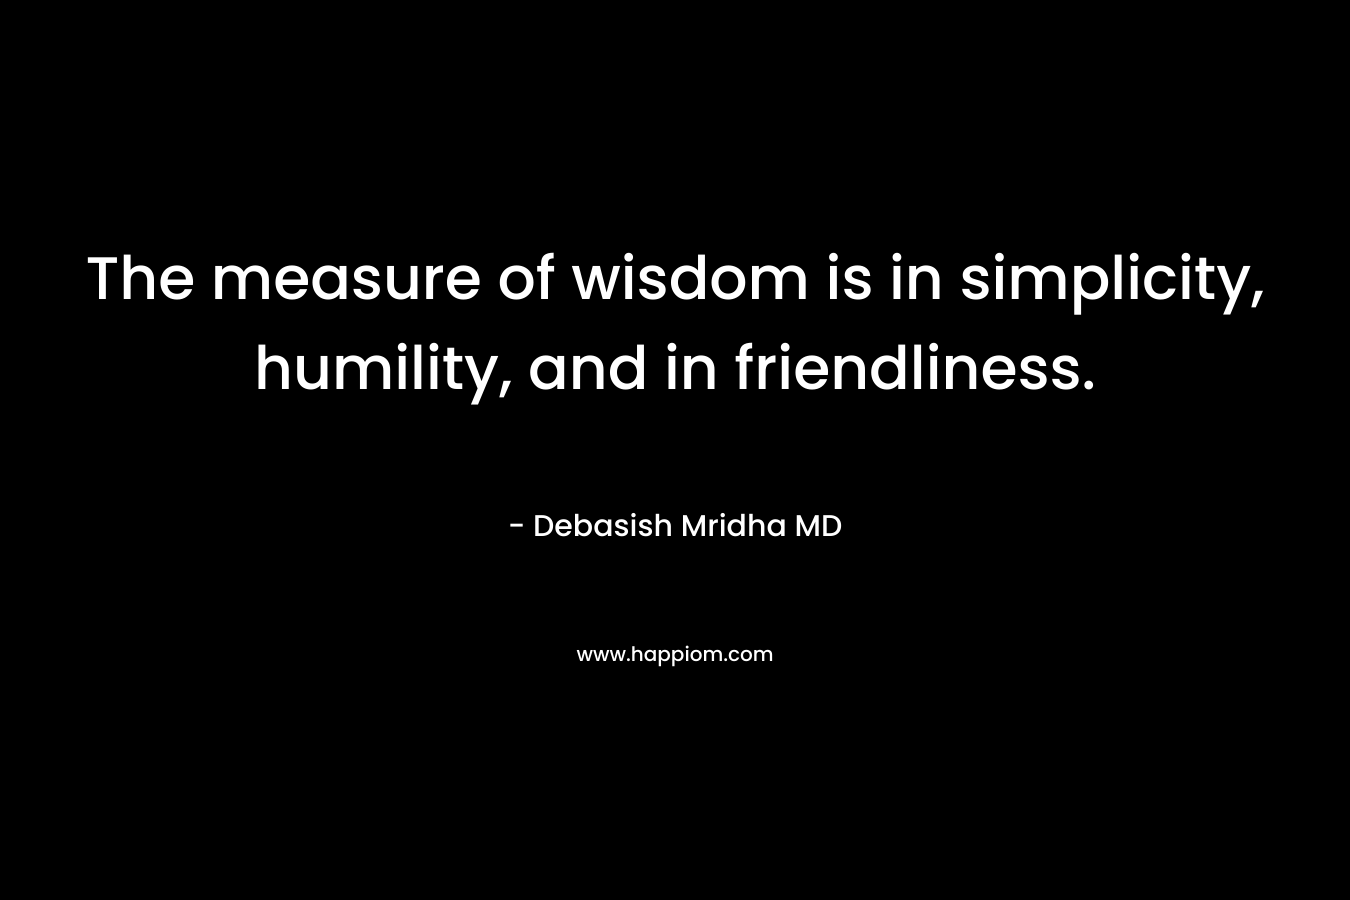 The measure of wisdom is in simplicity, humility, and in friendliness. – Debasish Mridha MD